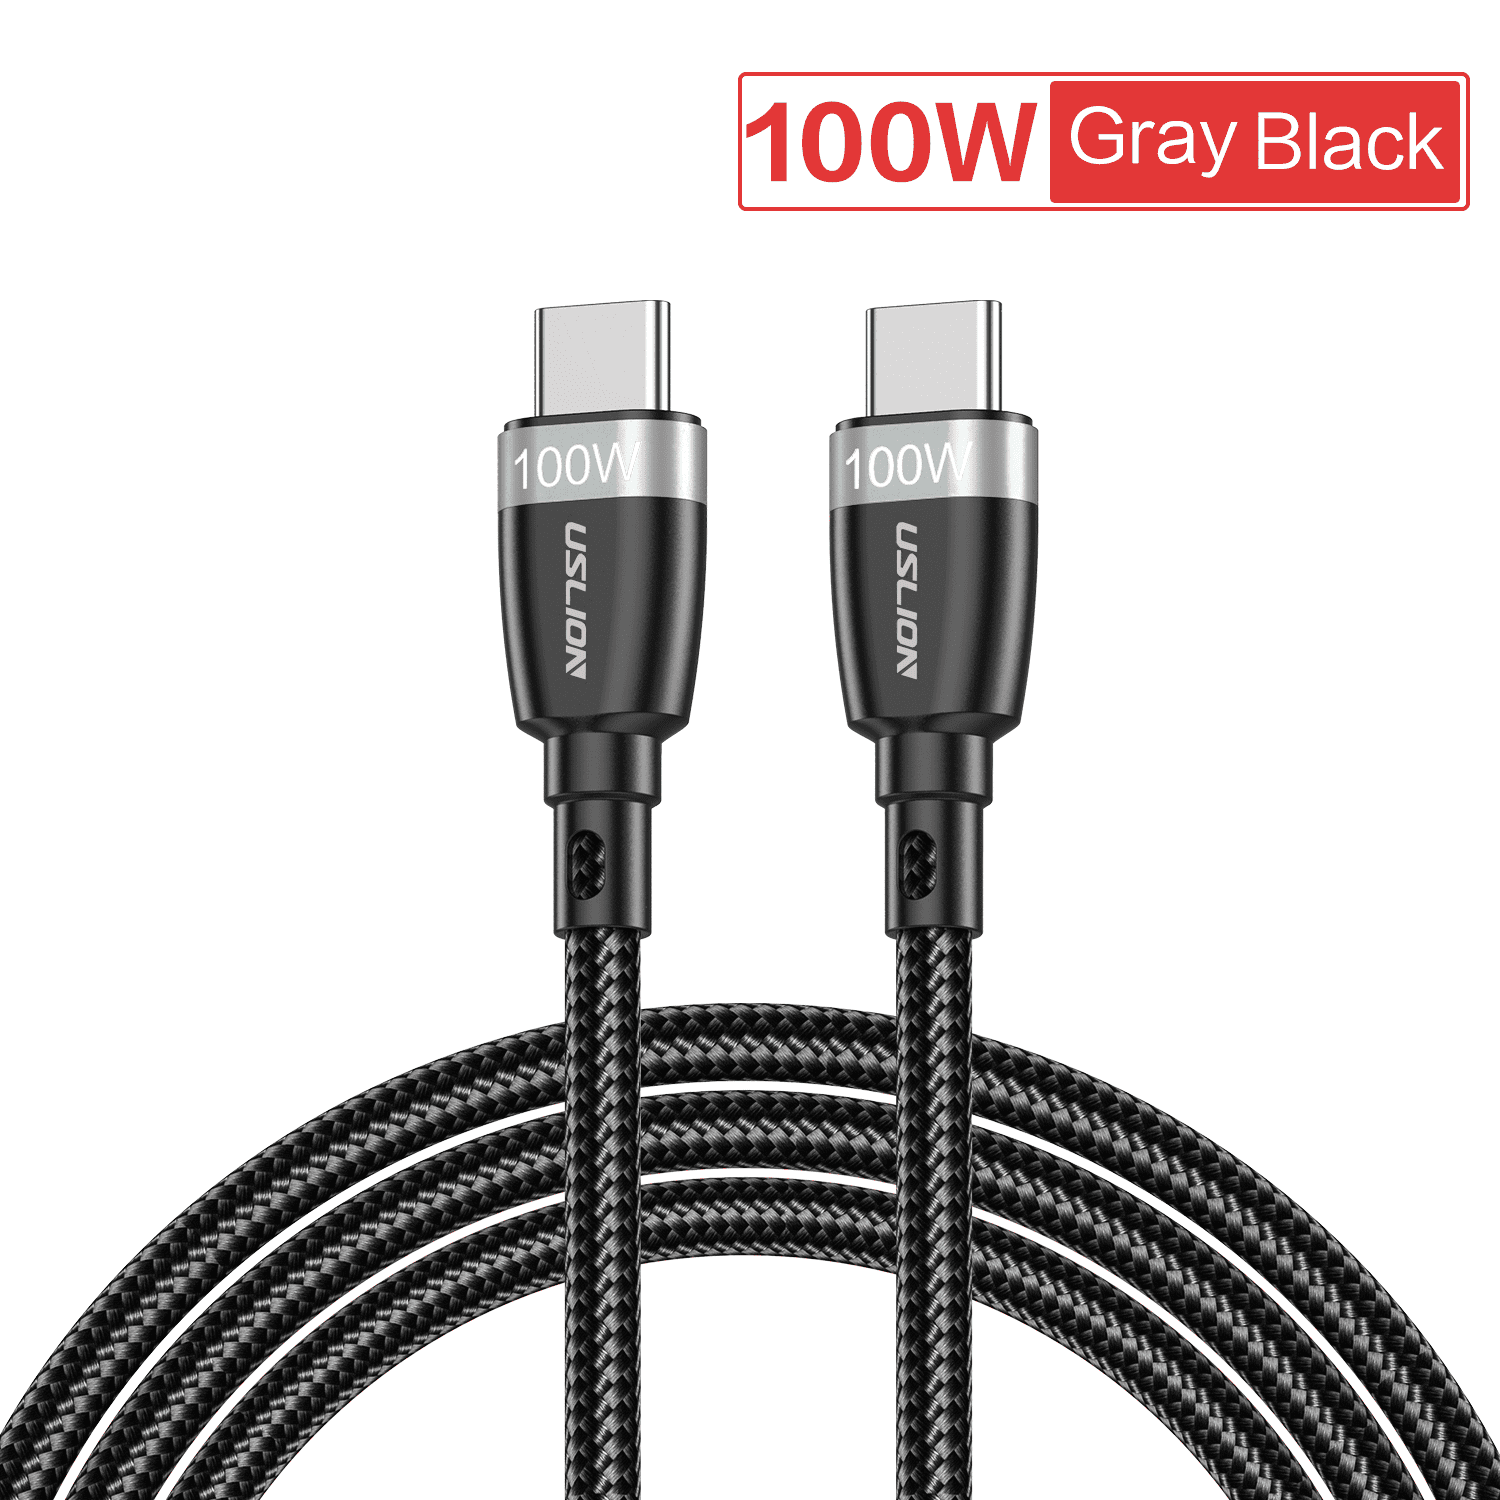 HD Connection 17.8cm 3 Ports USB-C/Type-C 3.1 OTG Charge HUB Cable Black / LG G6 / Huawei P10 & P10 Plus/Xiaomi Mi 6 & Max 2 and Other Smartphones Convenient for Galaxy S8 & S8 